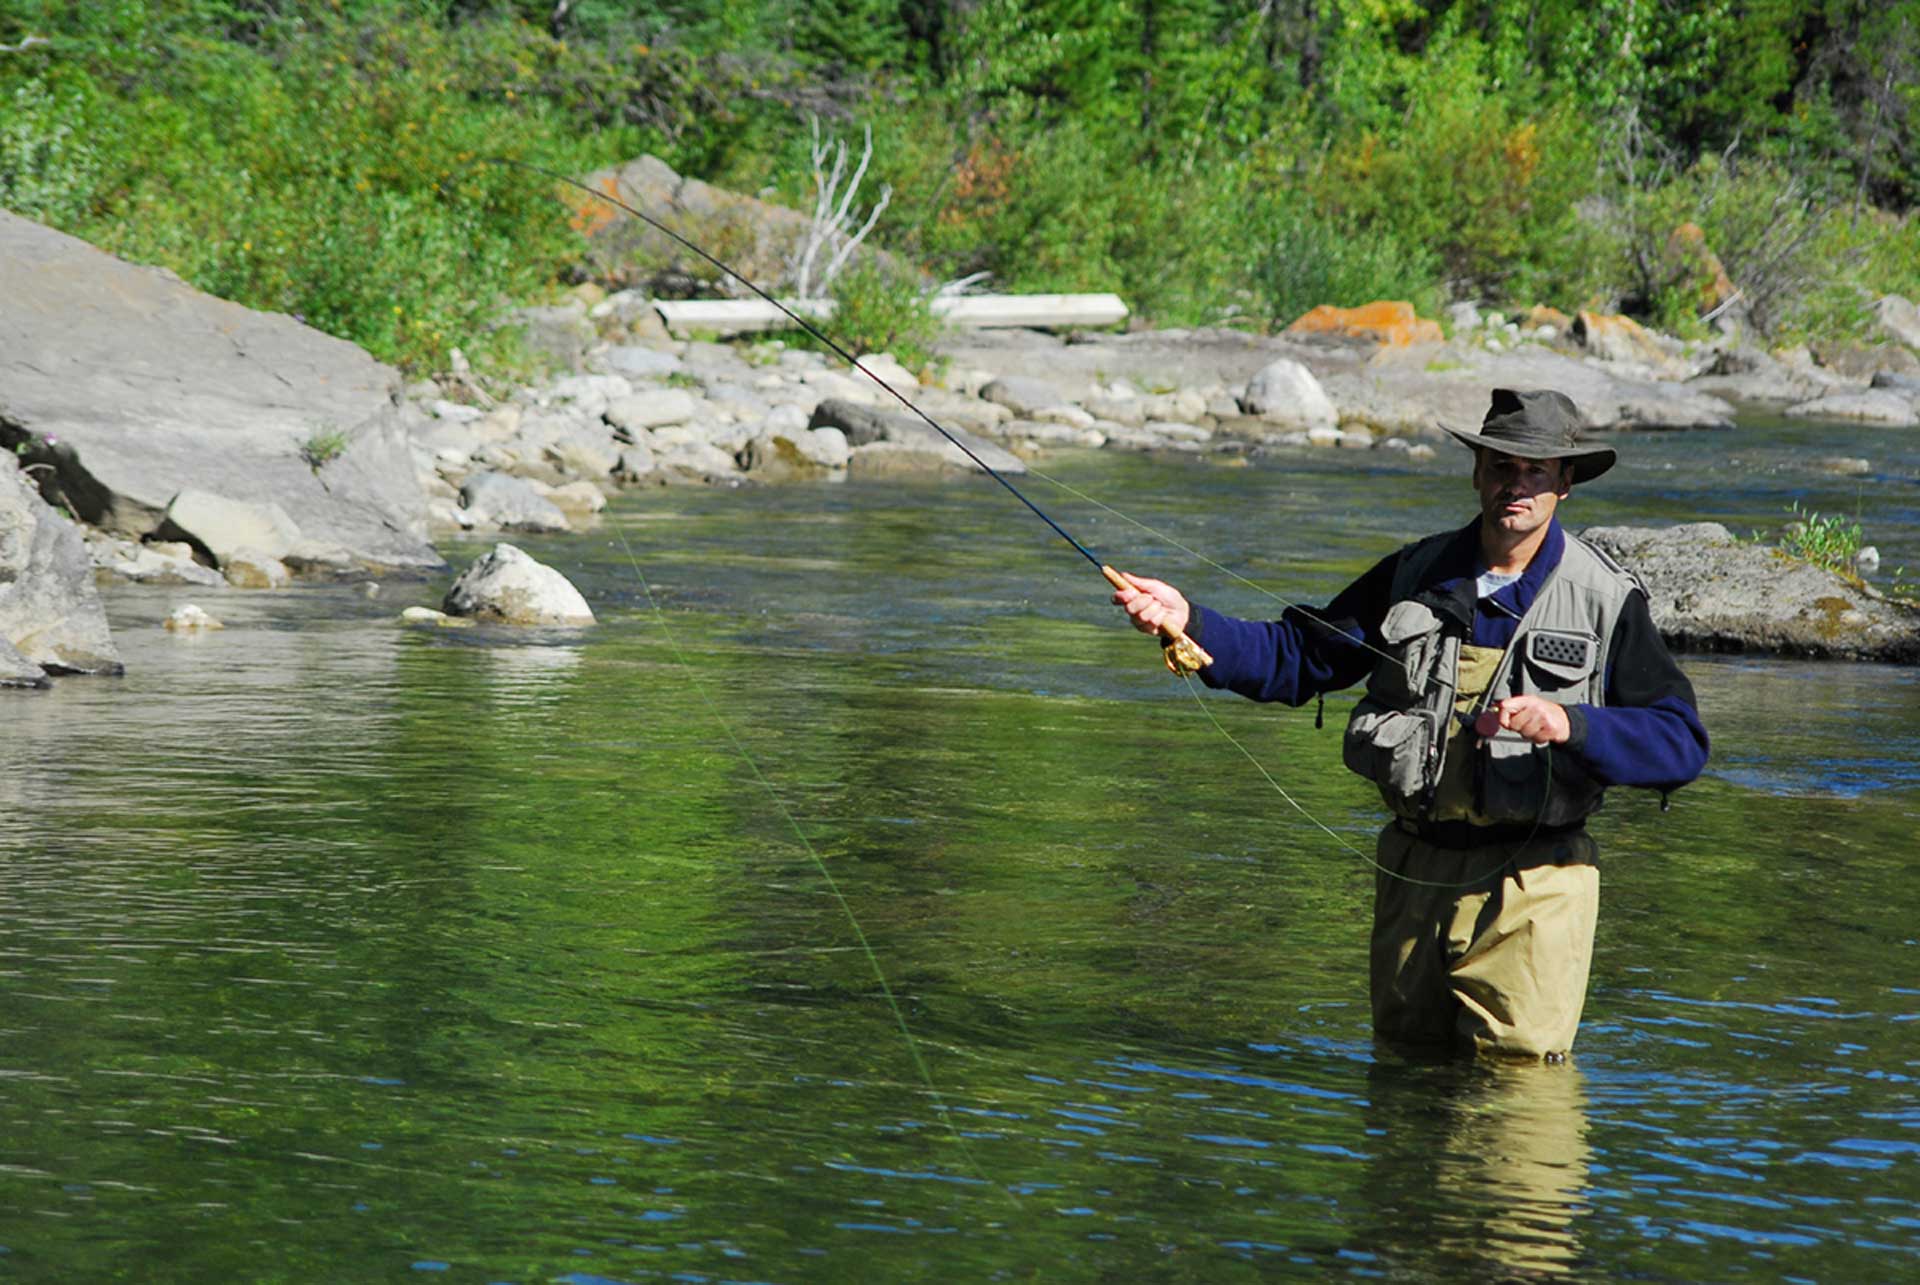 fishing footer: Fishing > North Thompson Valley